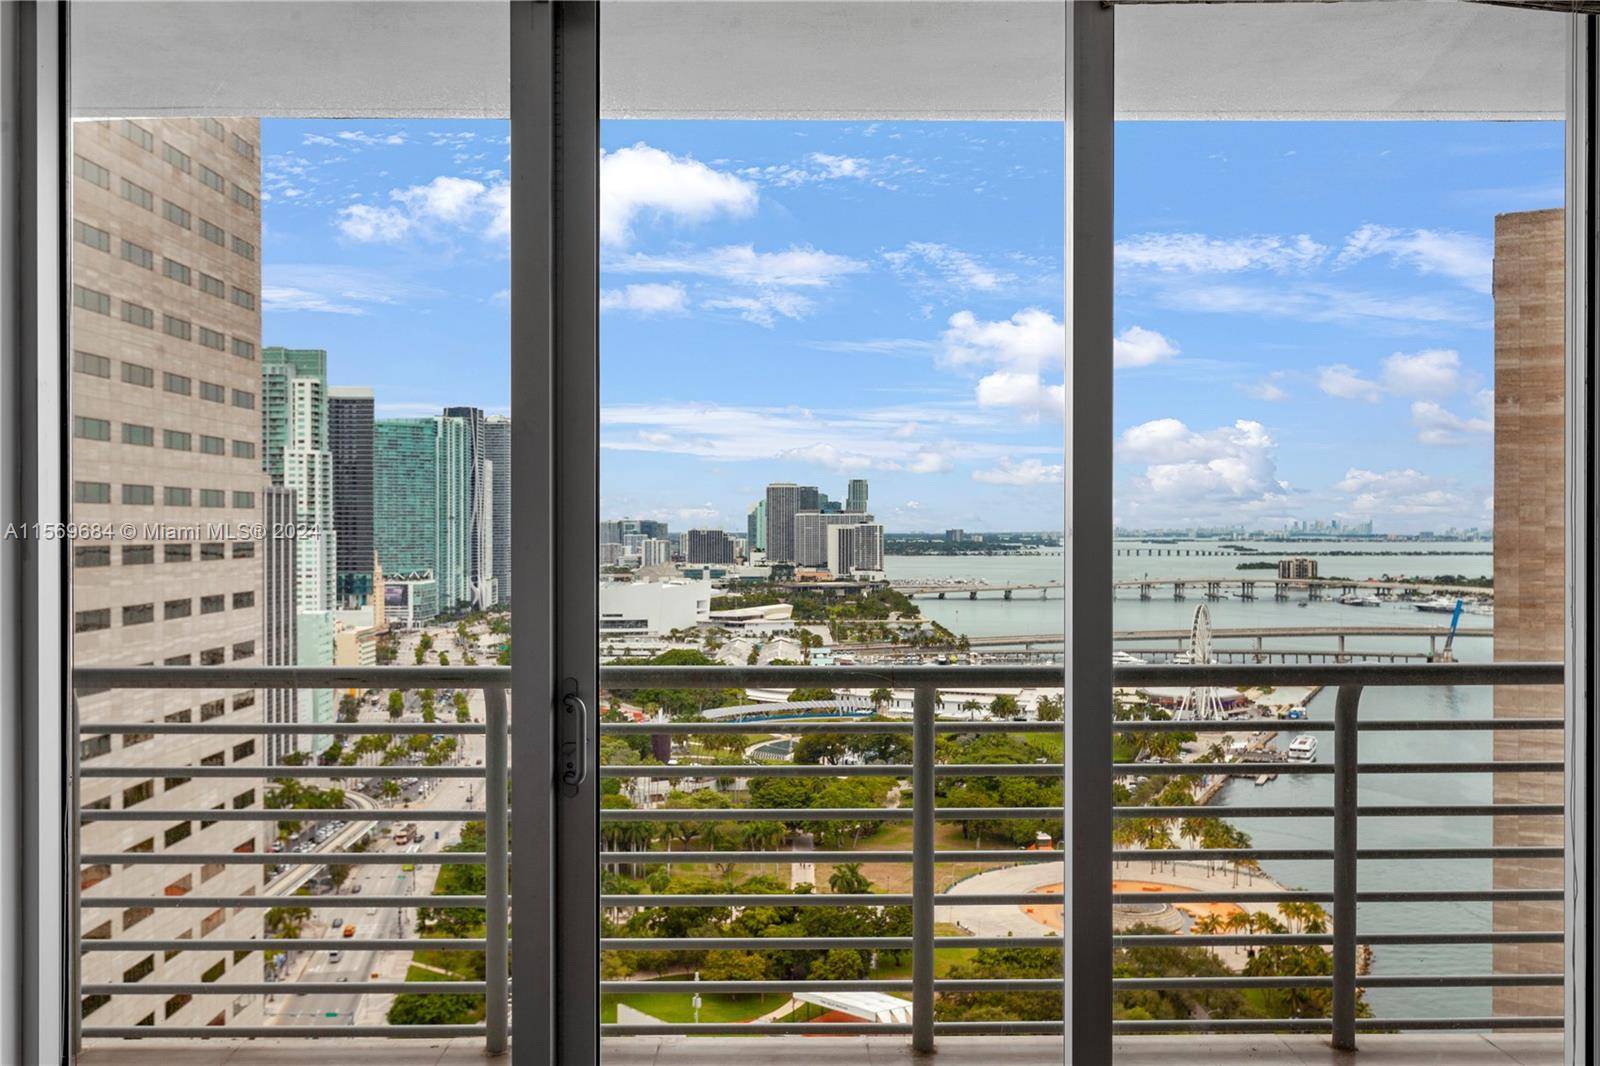 Enjoy waterfront living in this spectacular 32nd floor apartment, boasting stunning views of the bay, Bayside Front Park, and the dazzling city skyline of Miami.